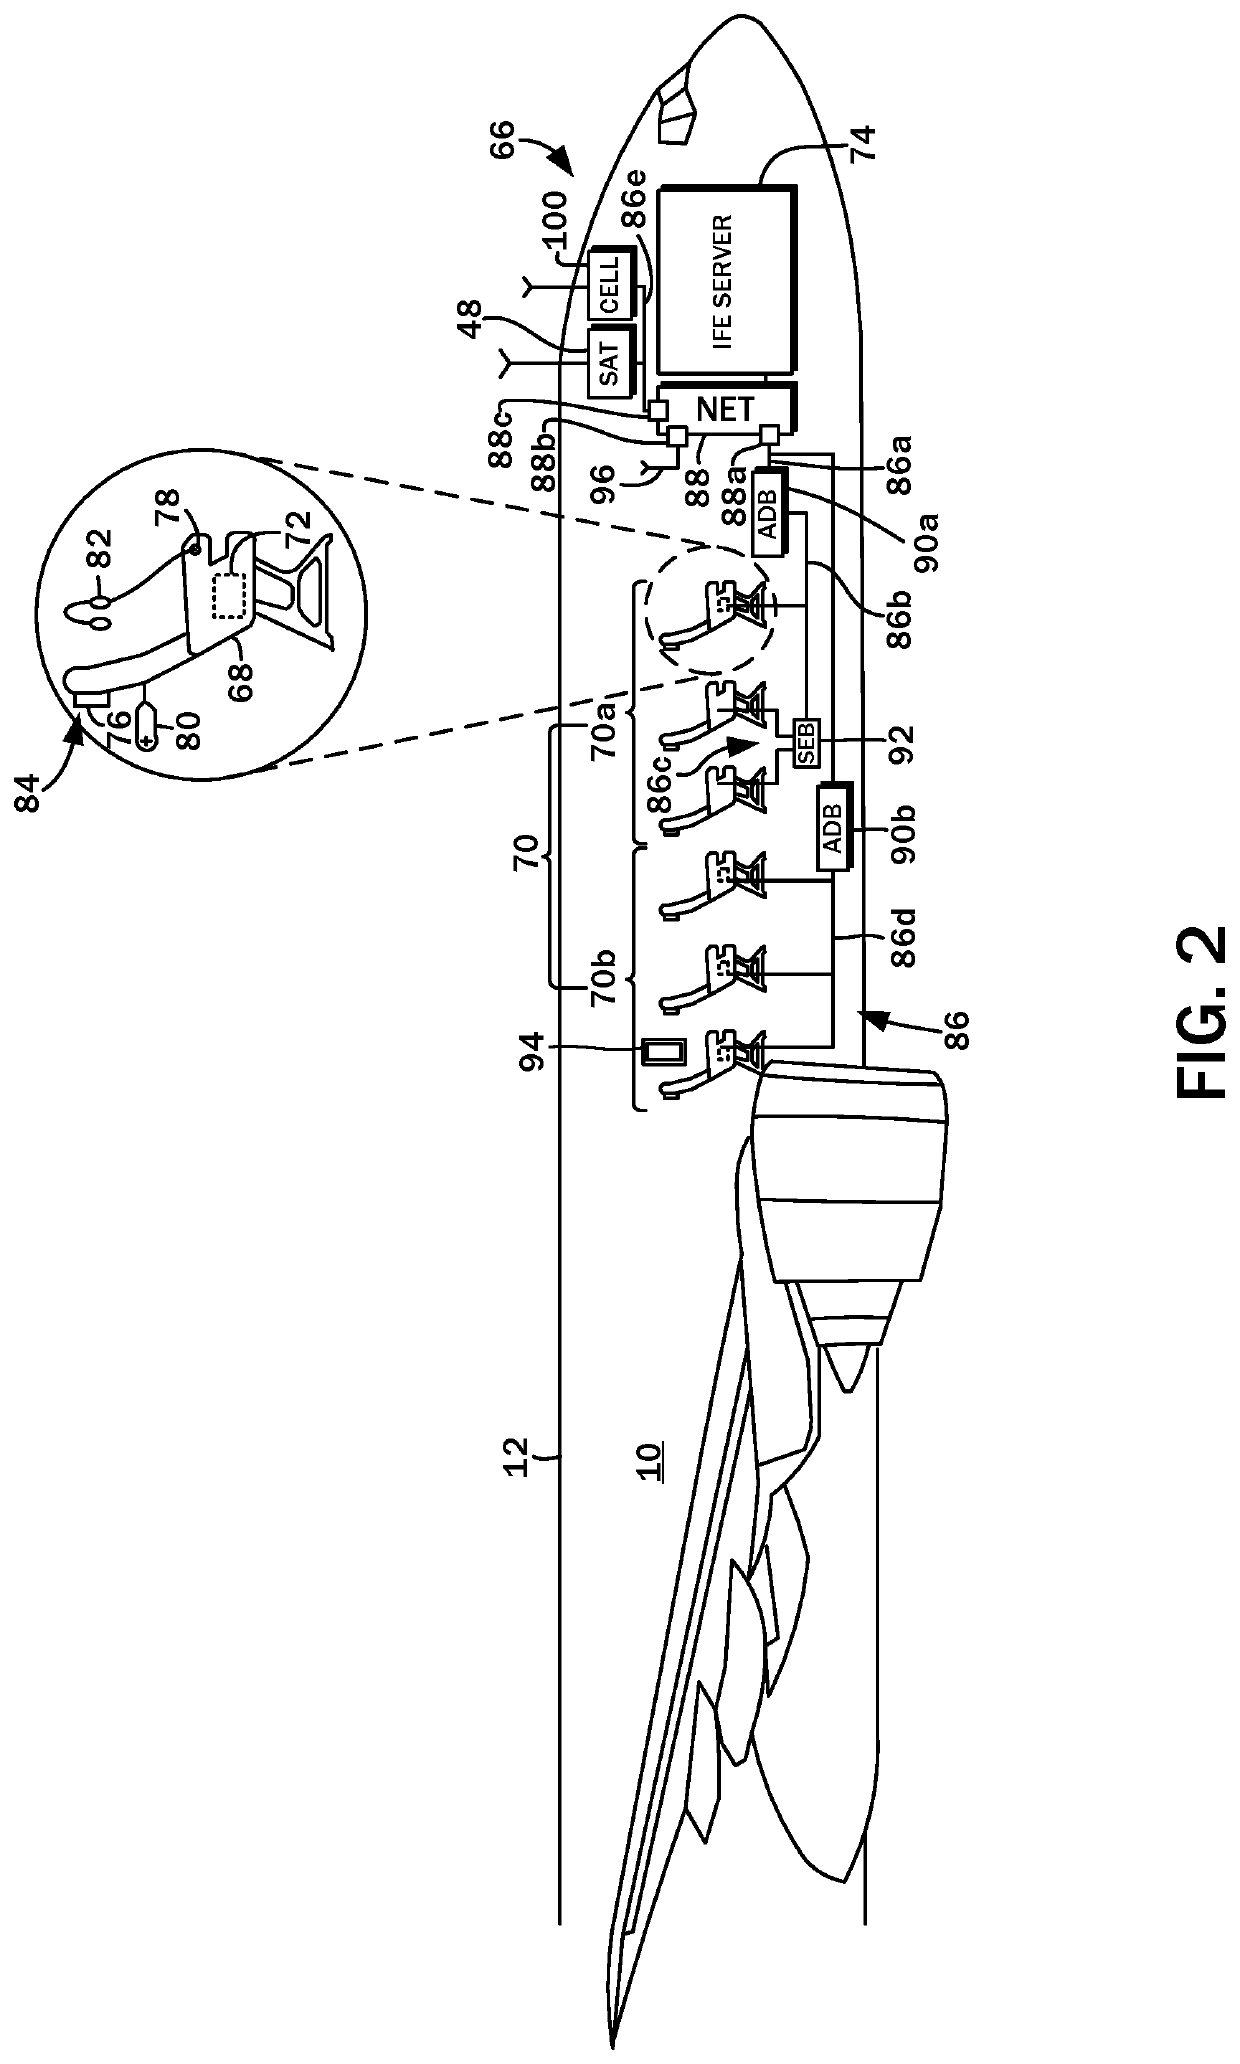 Vehicle auxiliary wireless personal area network system